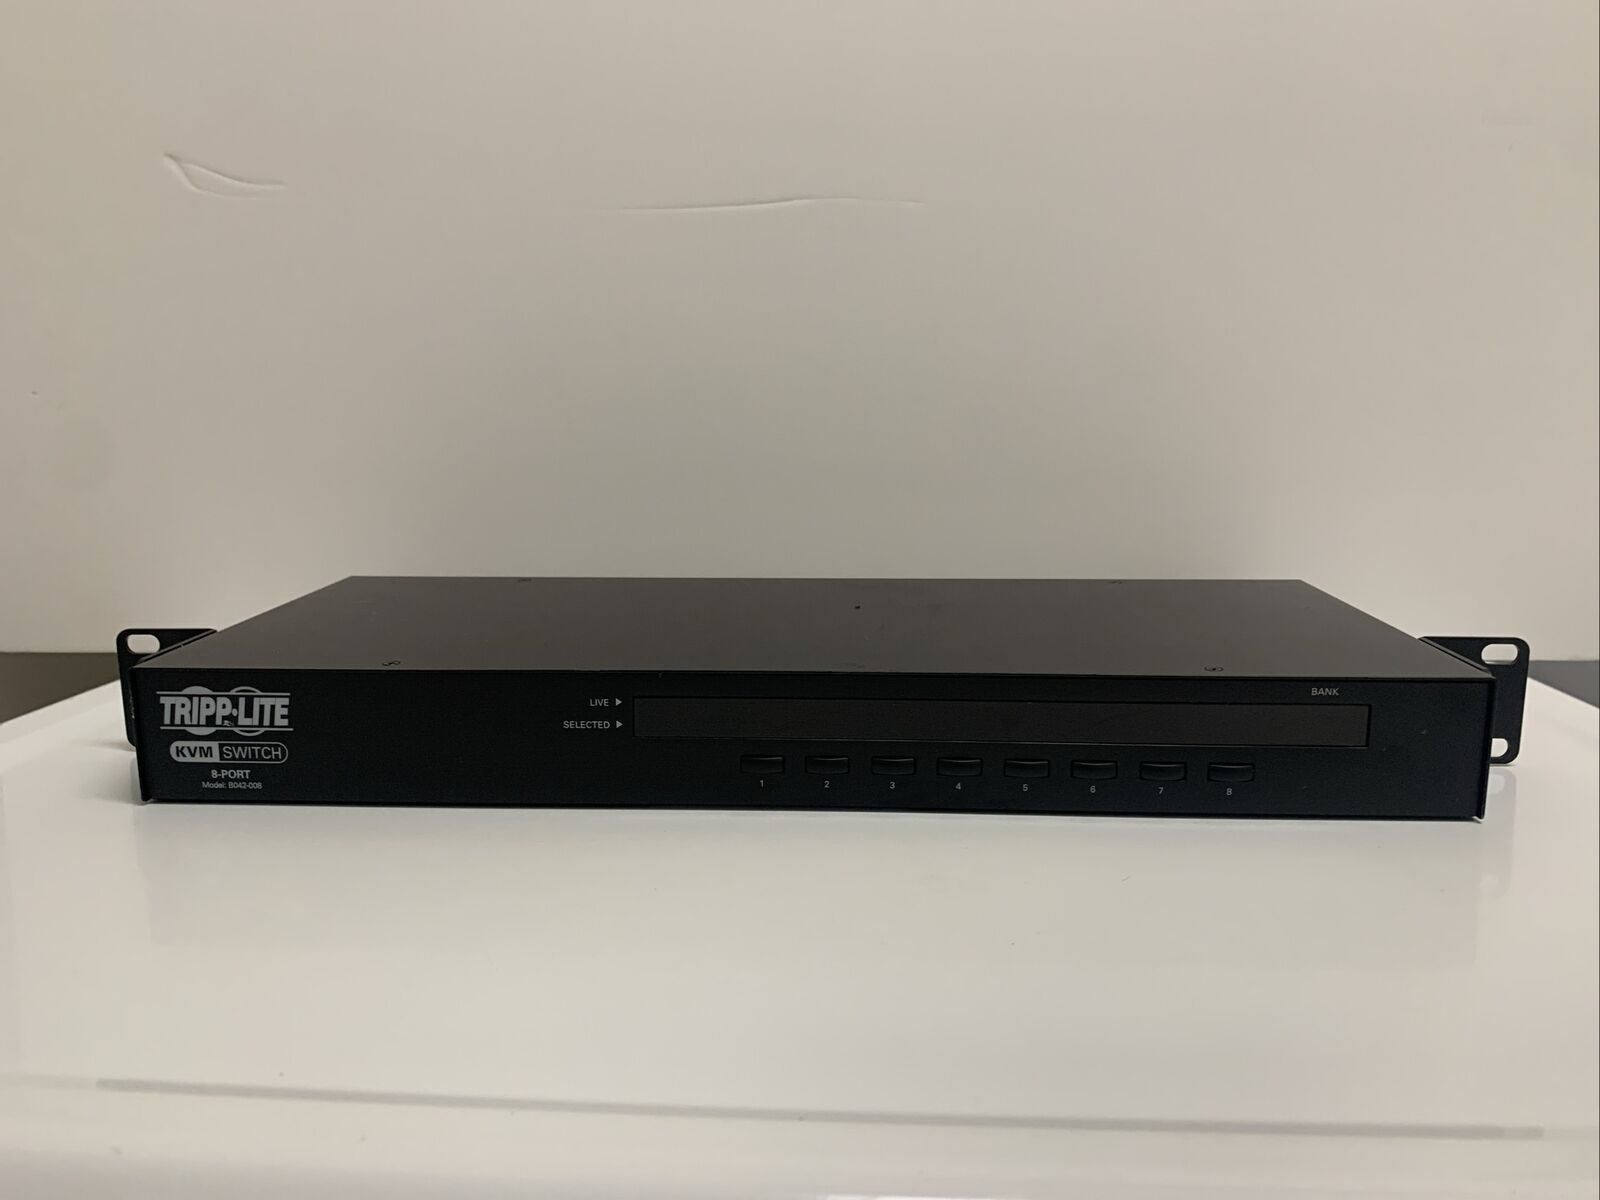 Tripp Lite B042-008 8 Port USB-PS/2 KVM Switch | Tested but no cables included